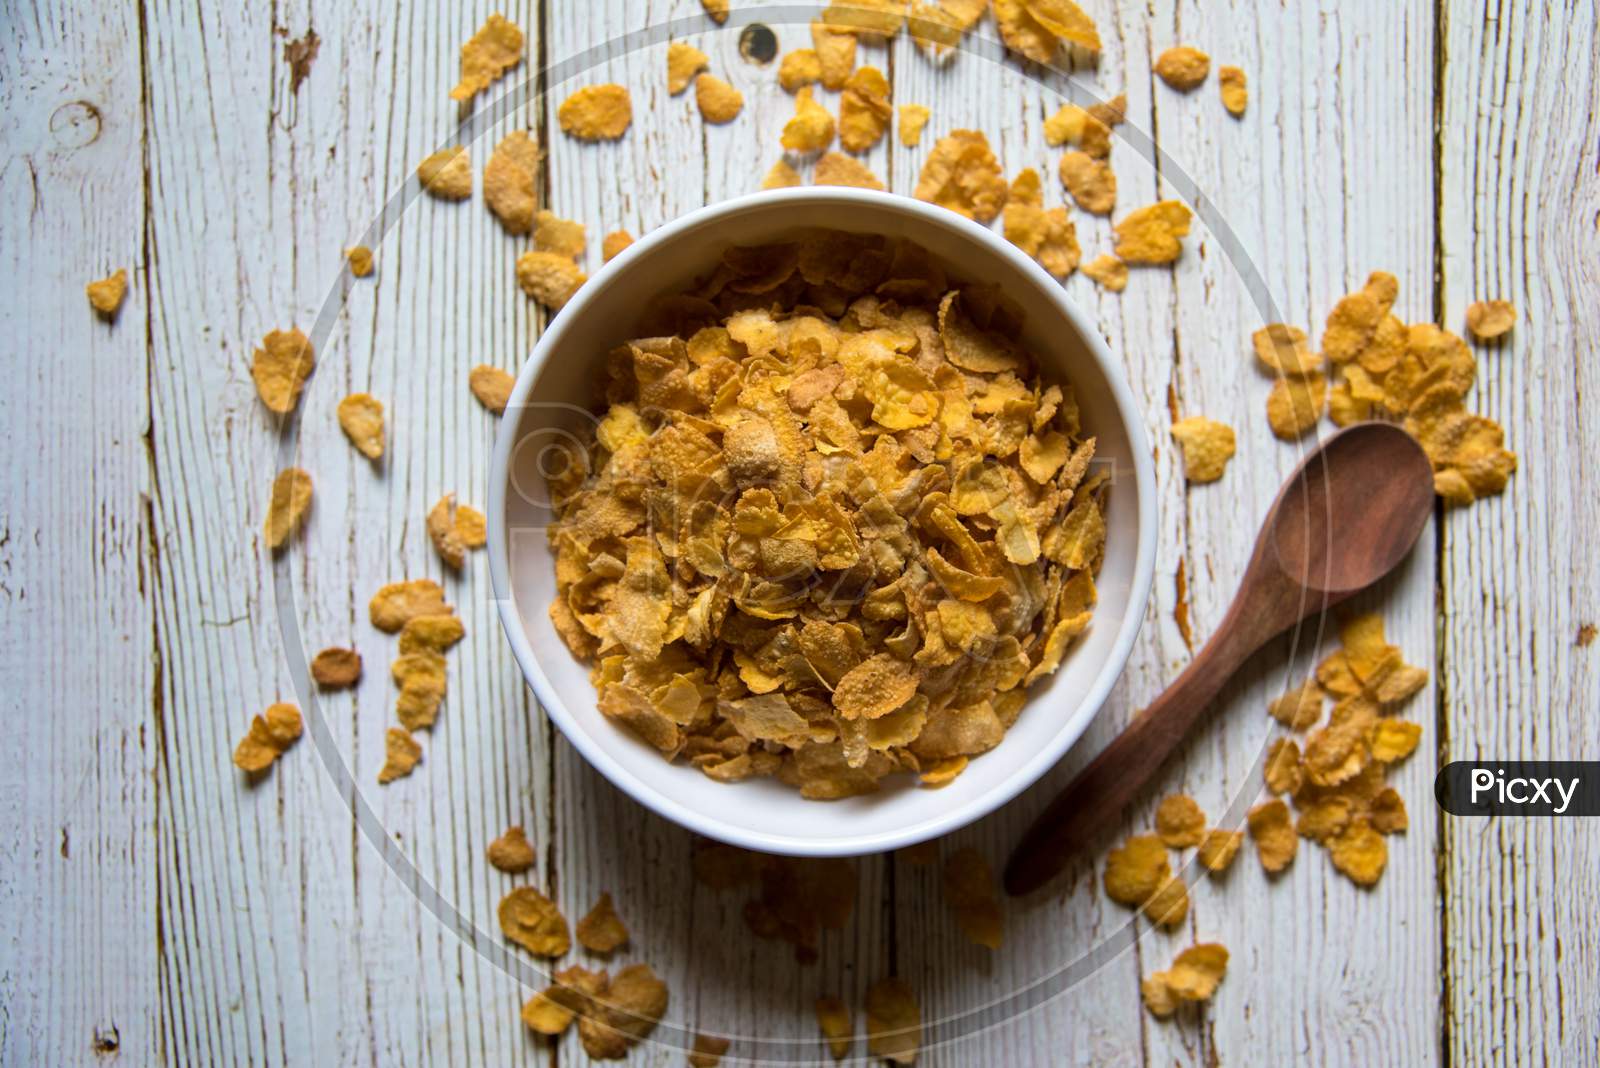 Top view of cornflakes in a bowl on a background